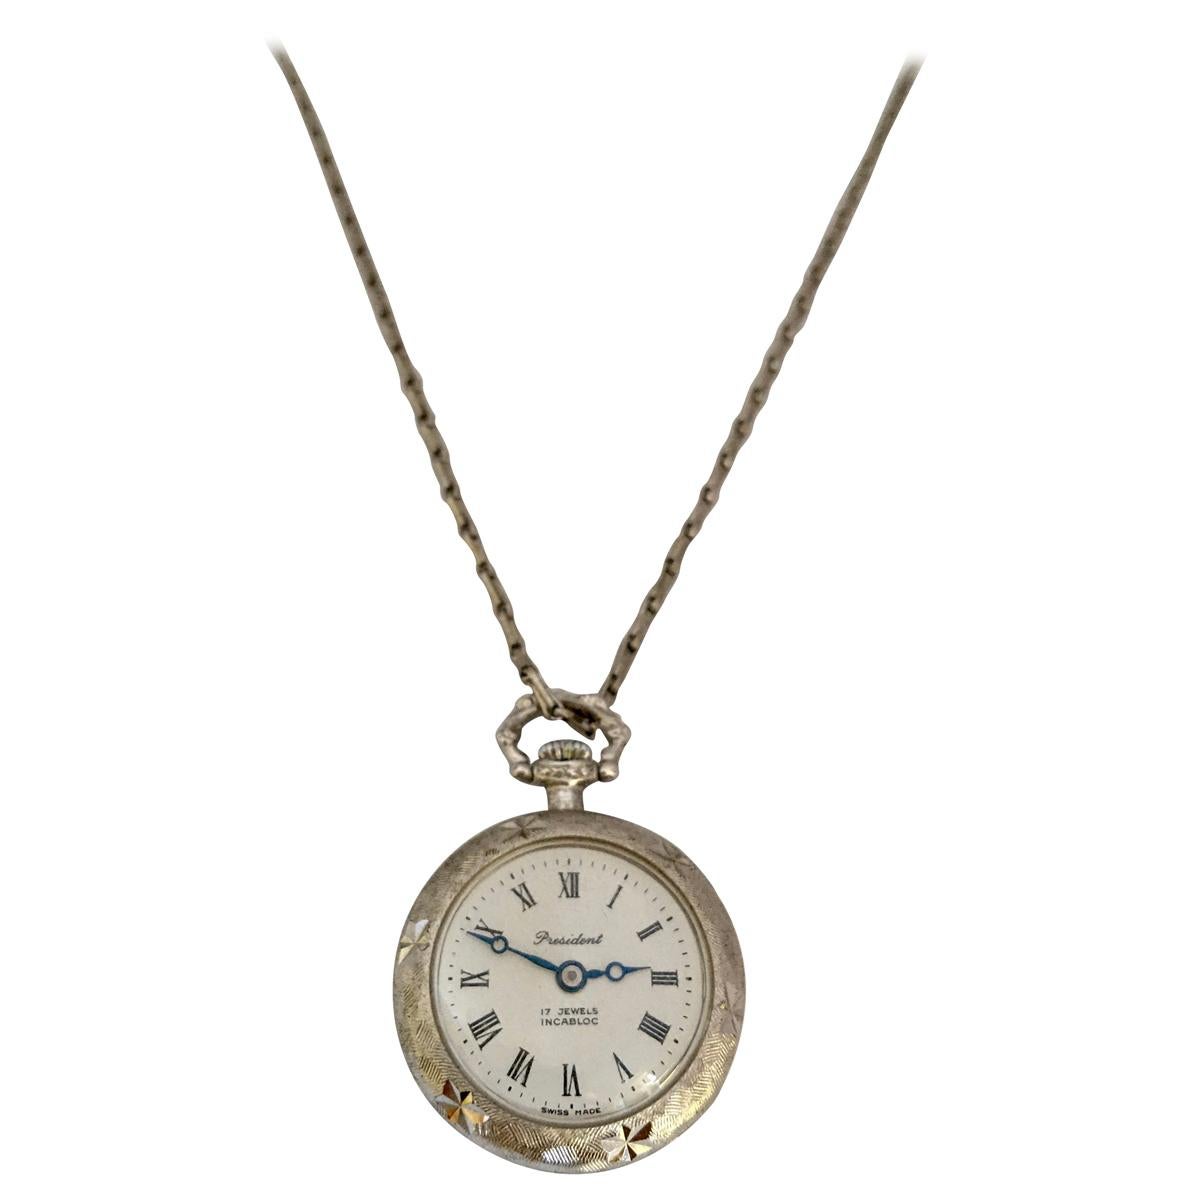 Vintage 1960s Hand-Winding Silver Plated Engraved Pendant Watch